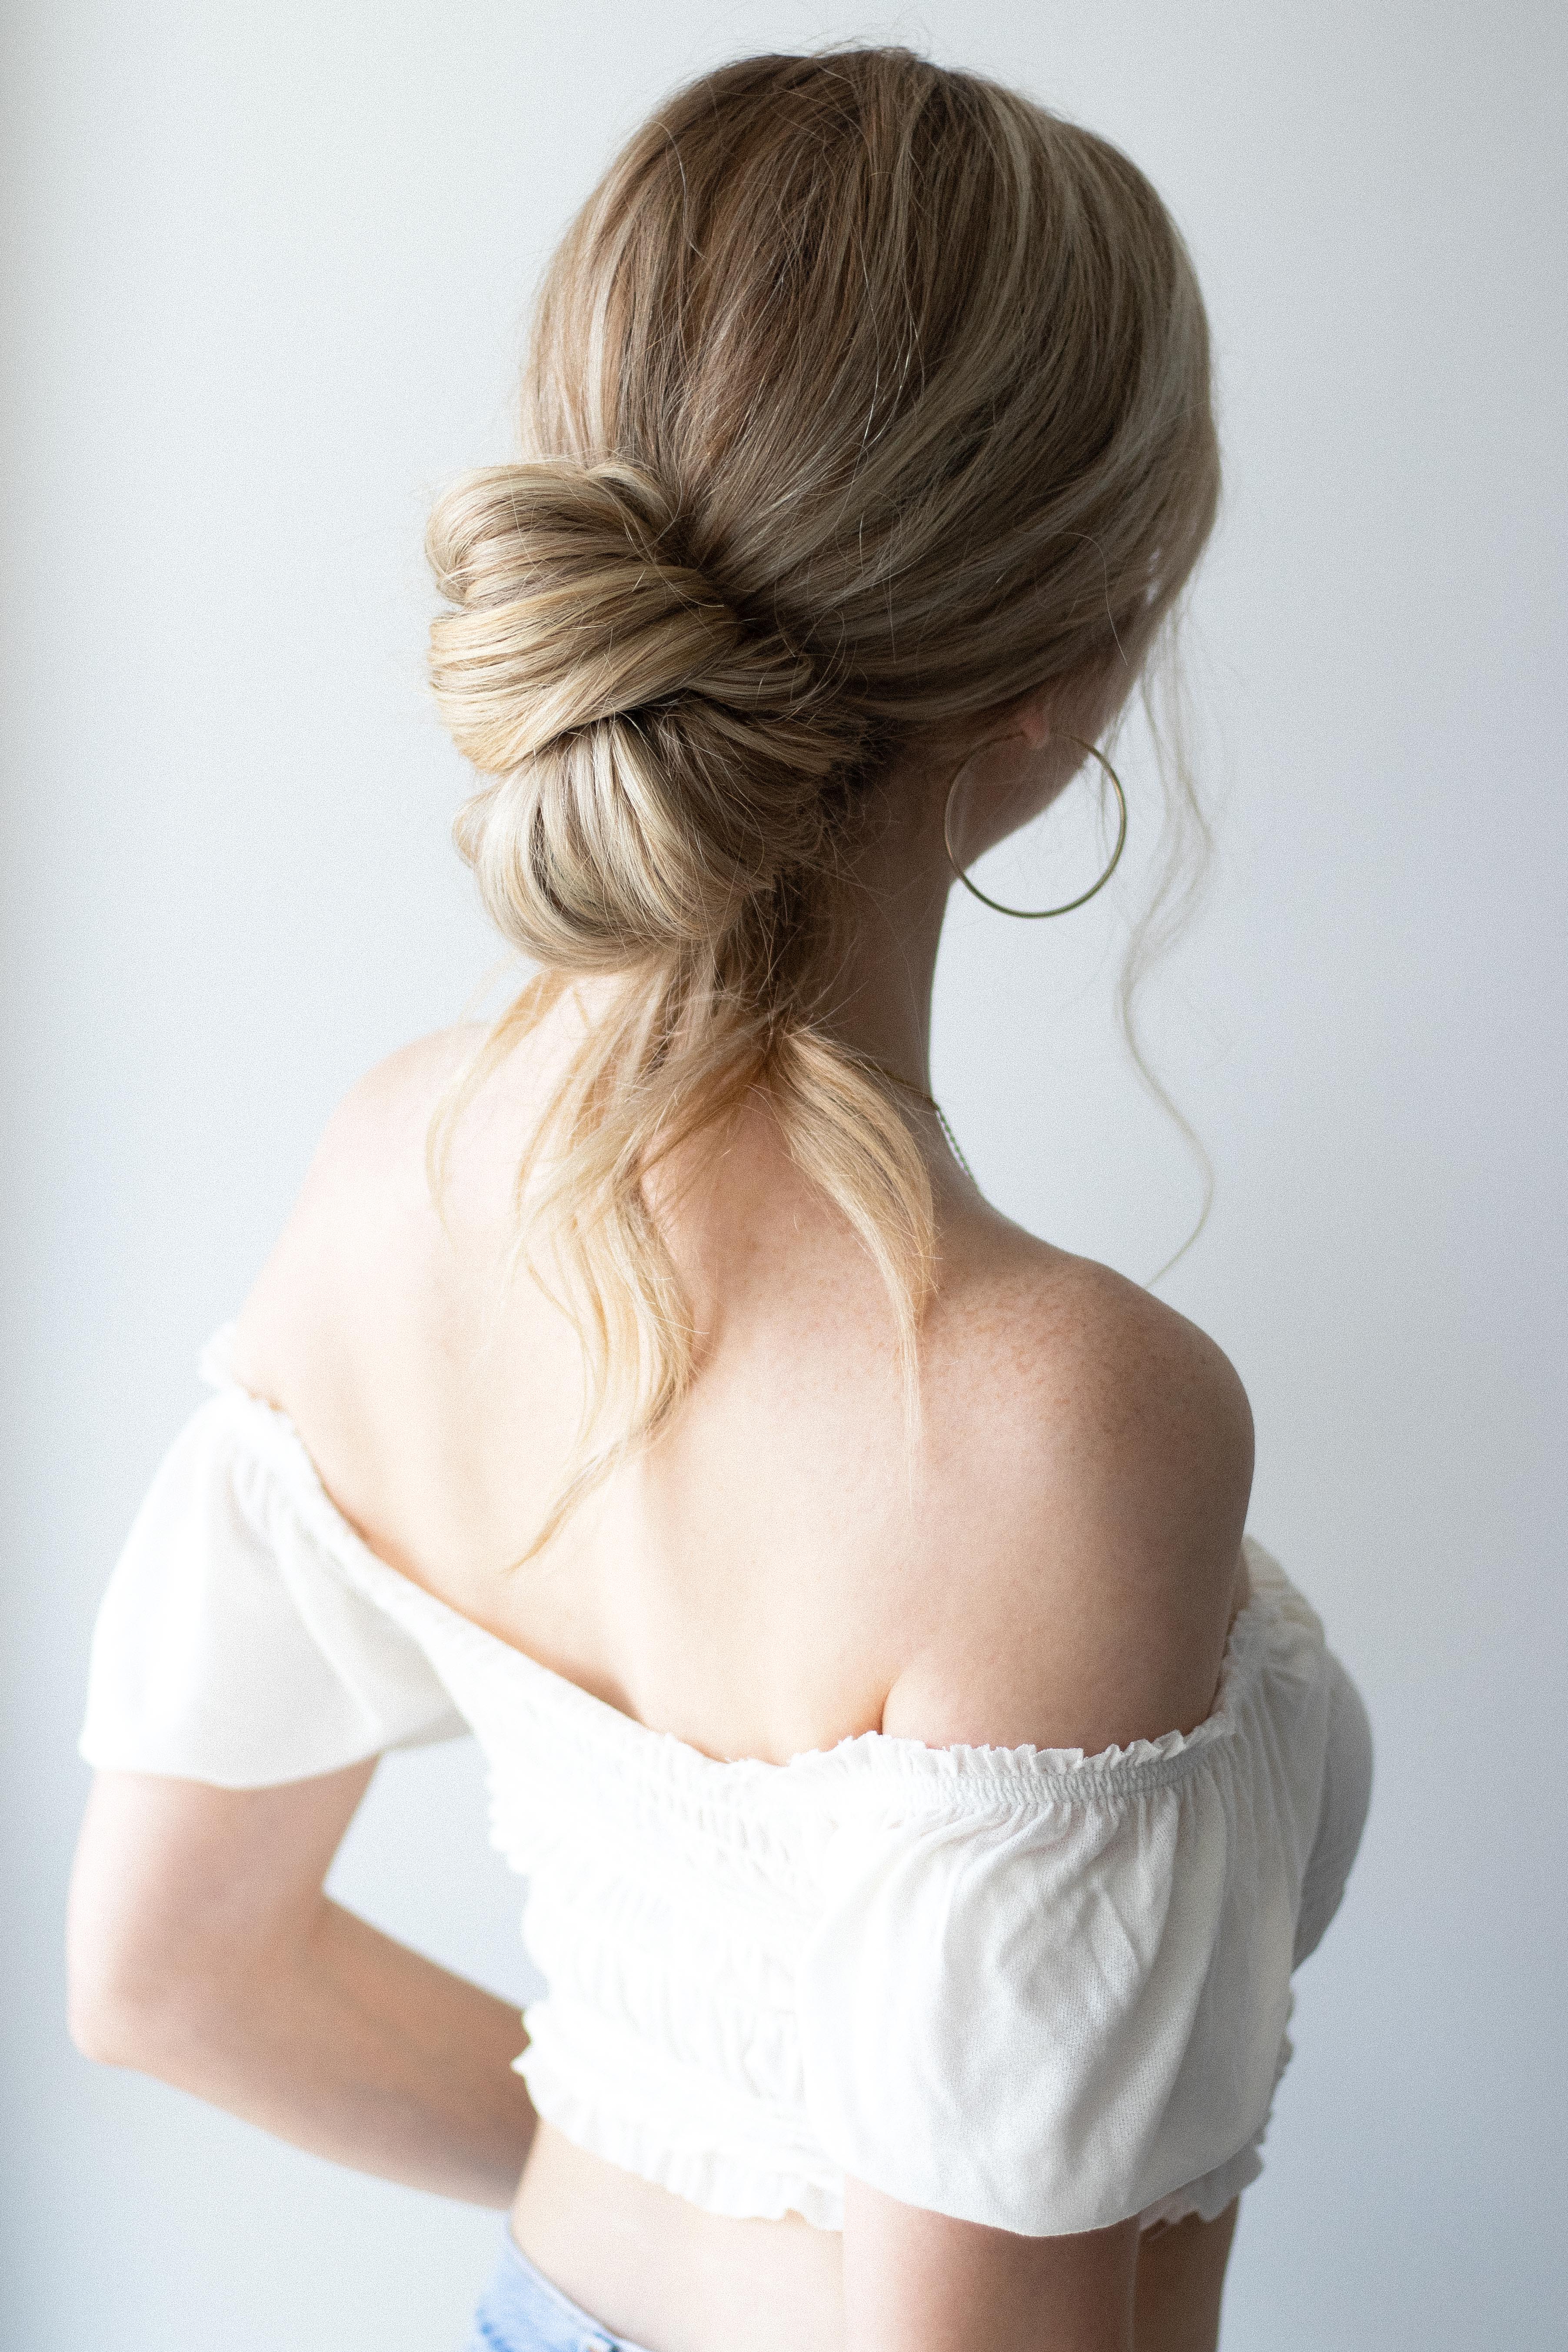 How To Easy Everyday Updo With Voir Haircare